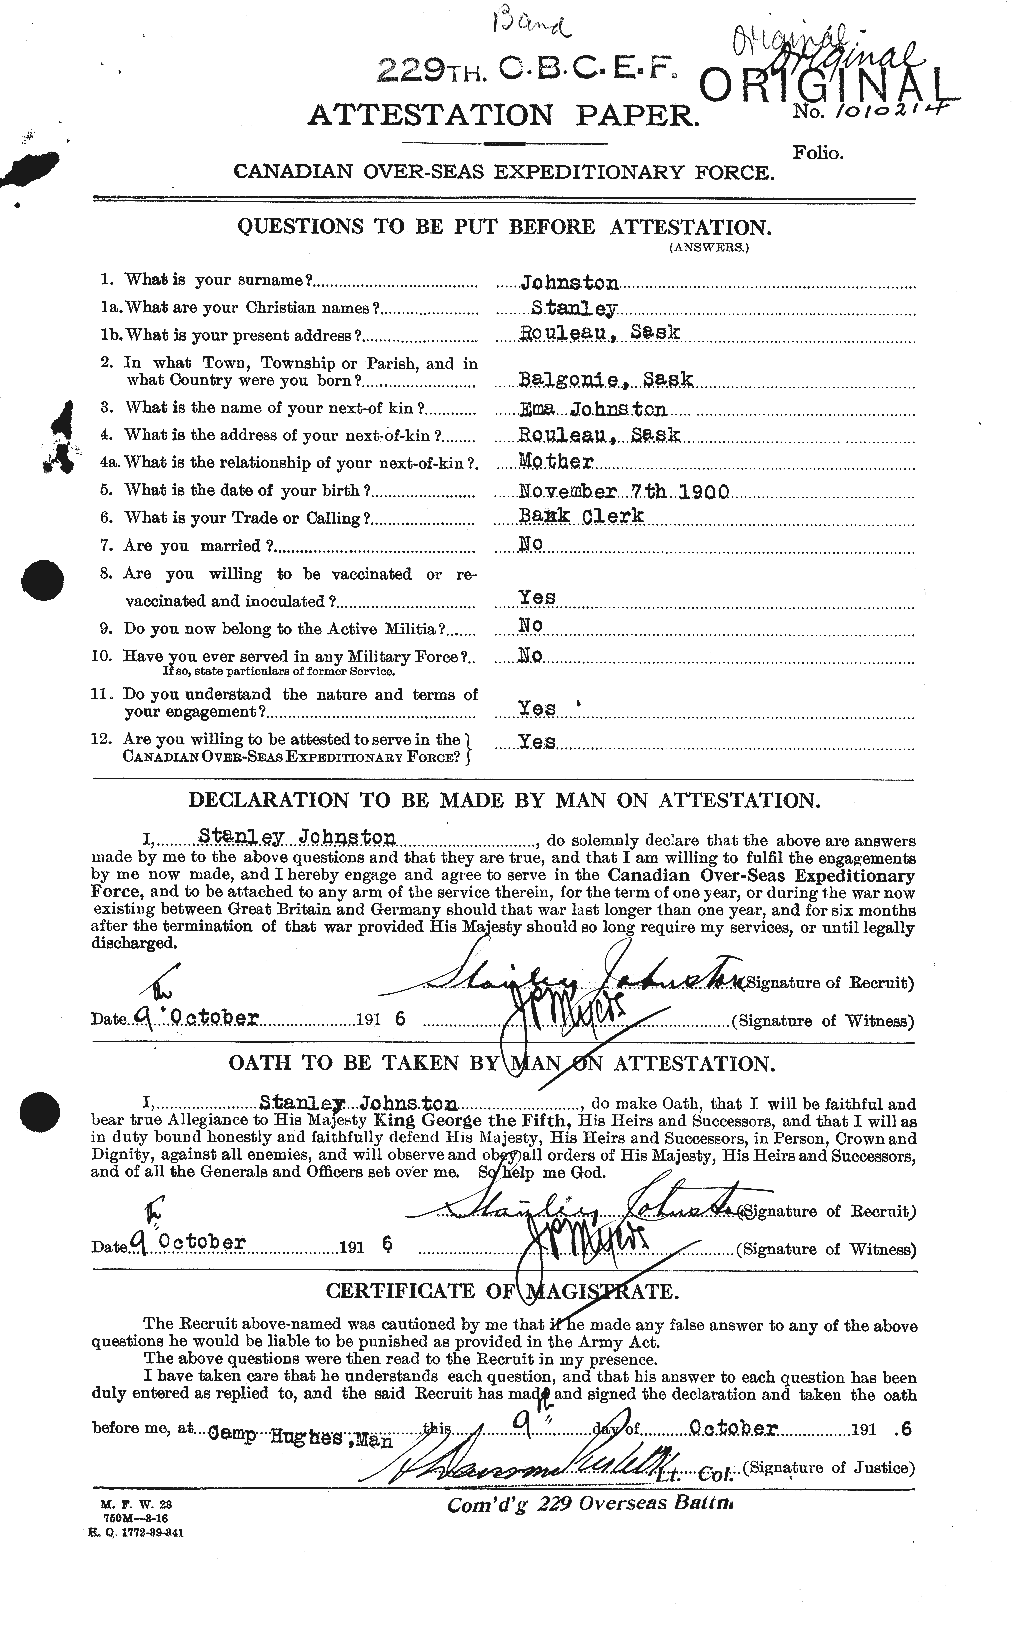 Personnel Records of the First World War - CEF 427101a